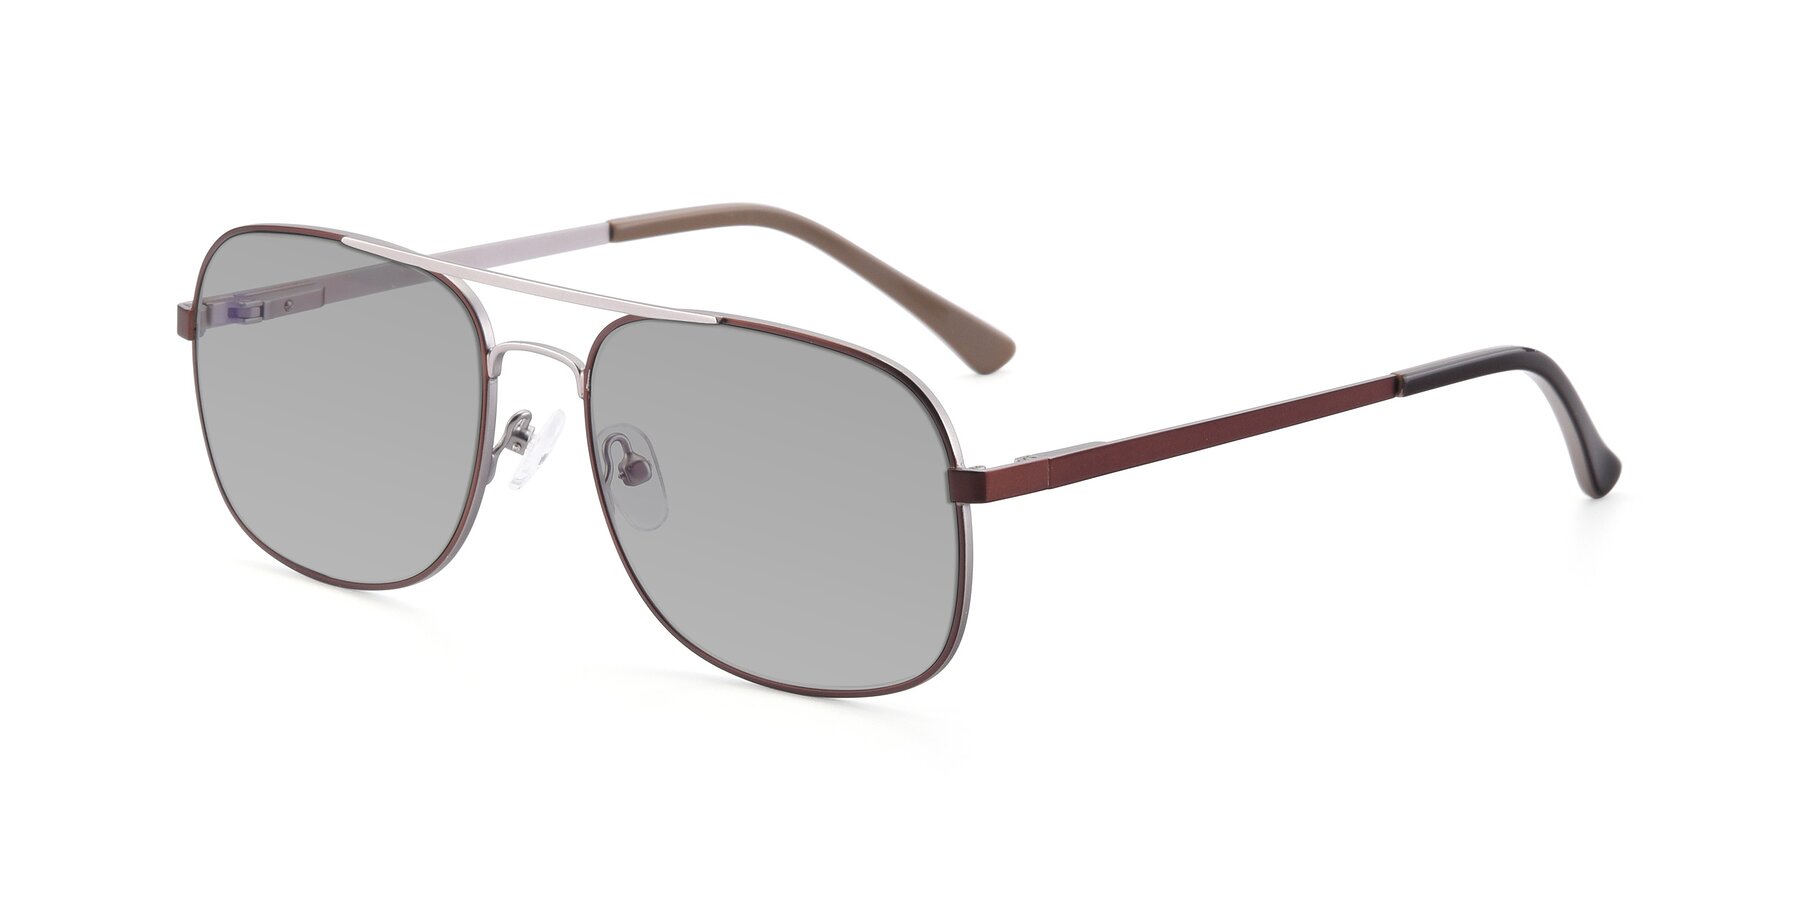 Angle of 9487 in Brown-Silver with Light Gray Tinted Lenses